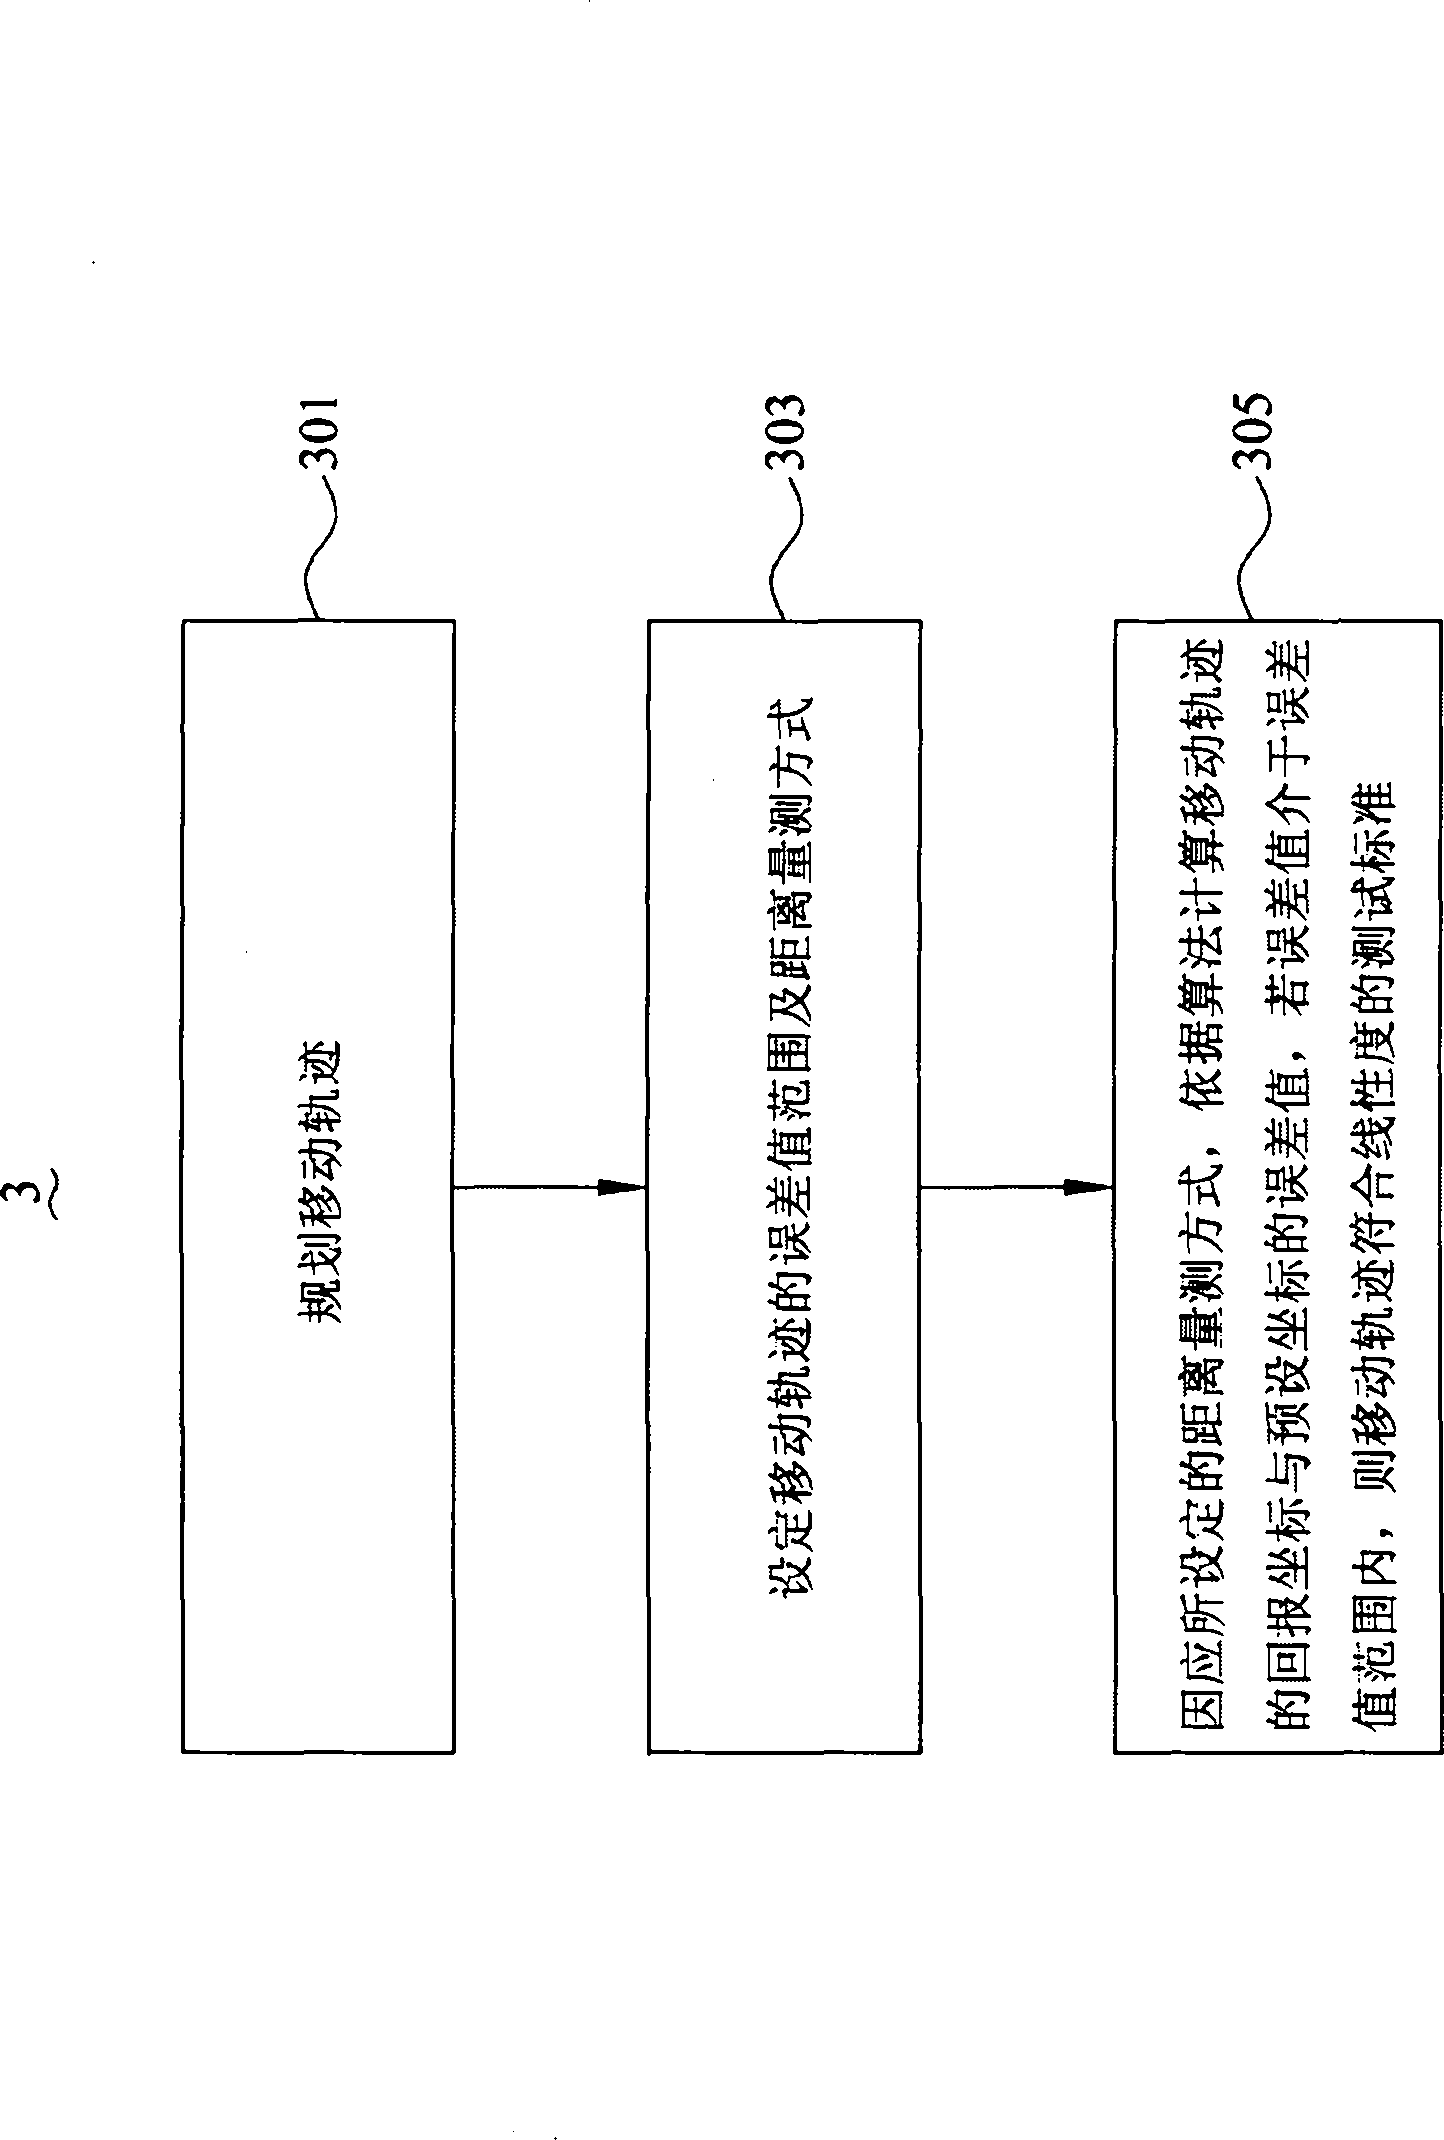 Linearity testing device and method